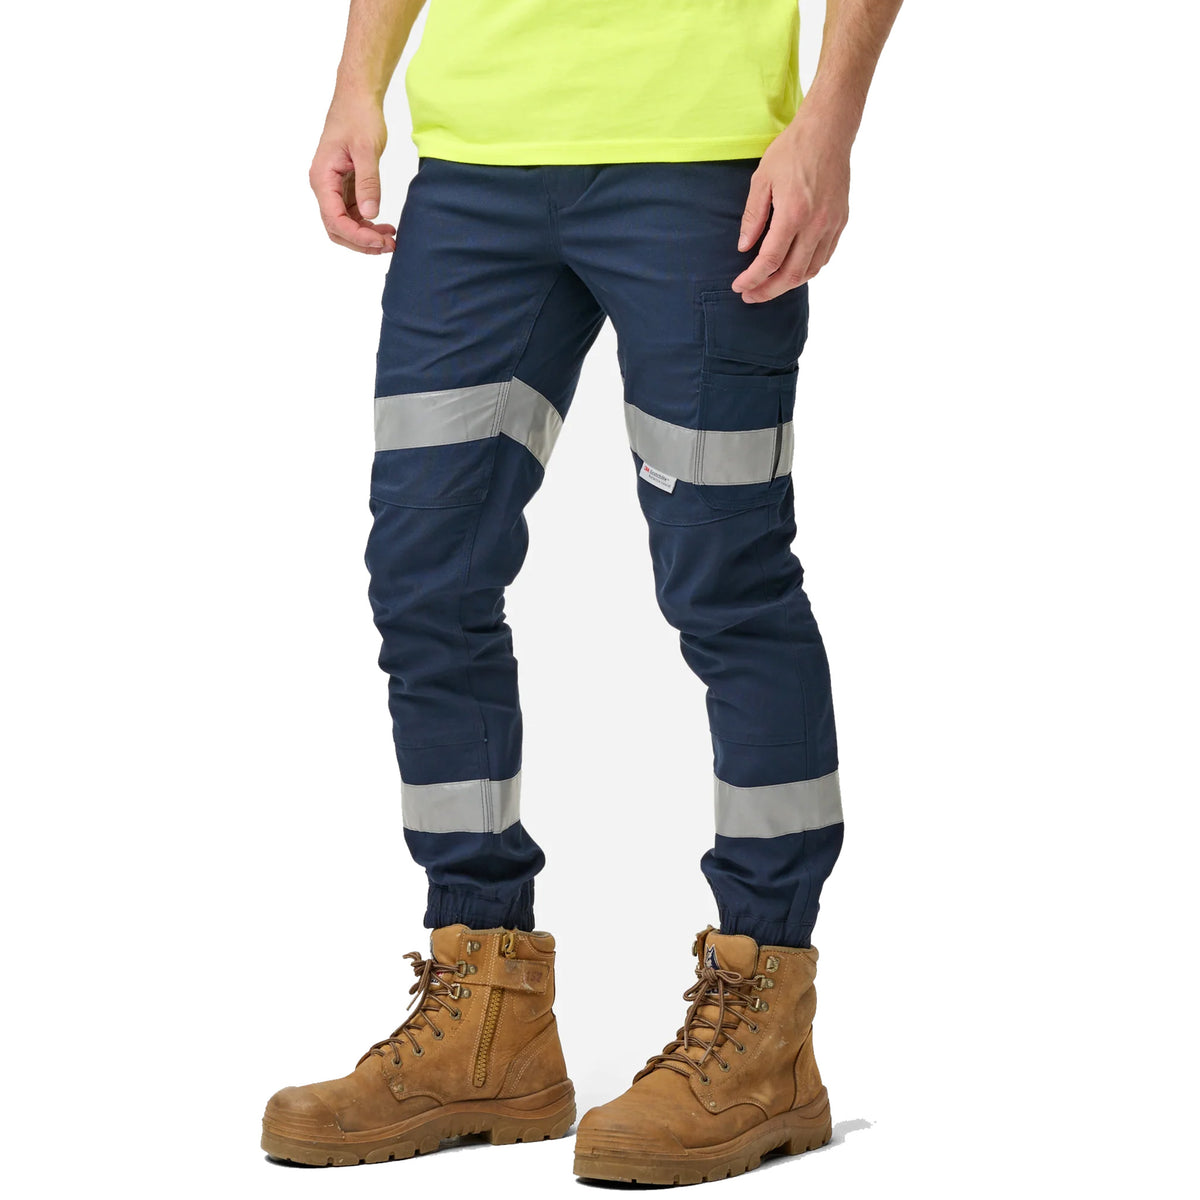 elwd reflective cuffed elastic pant in navy